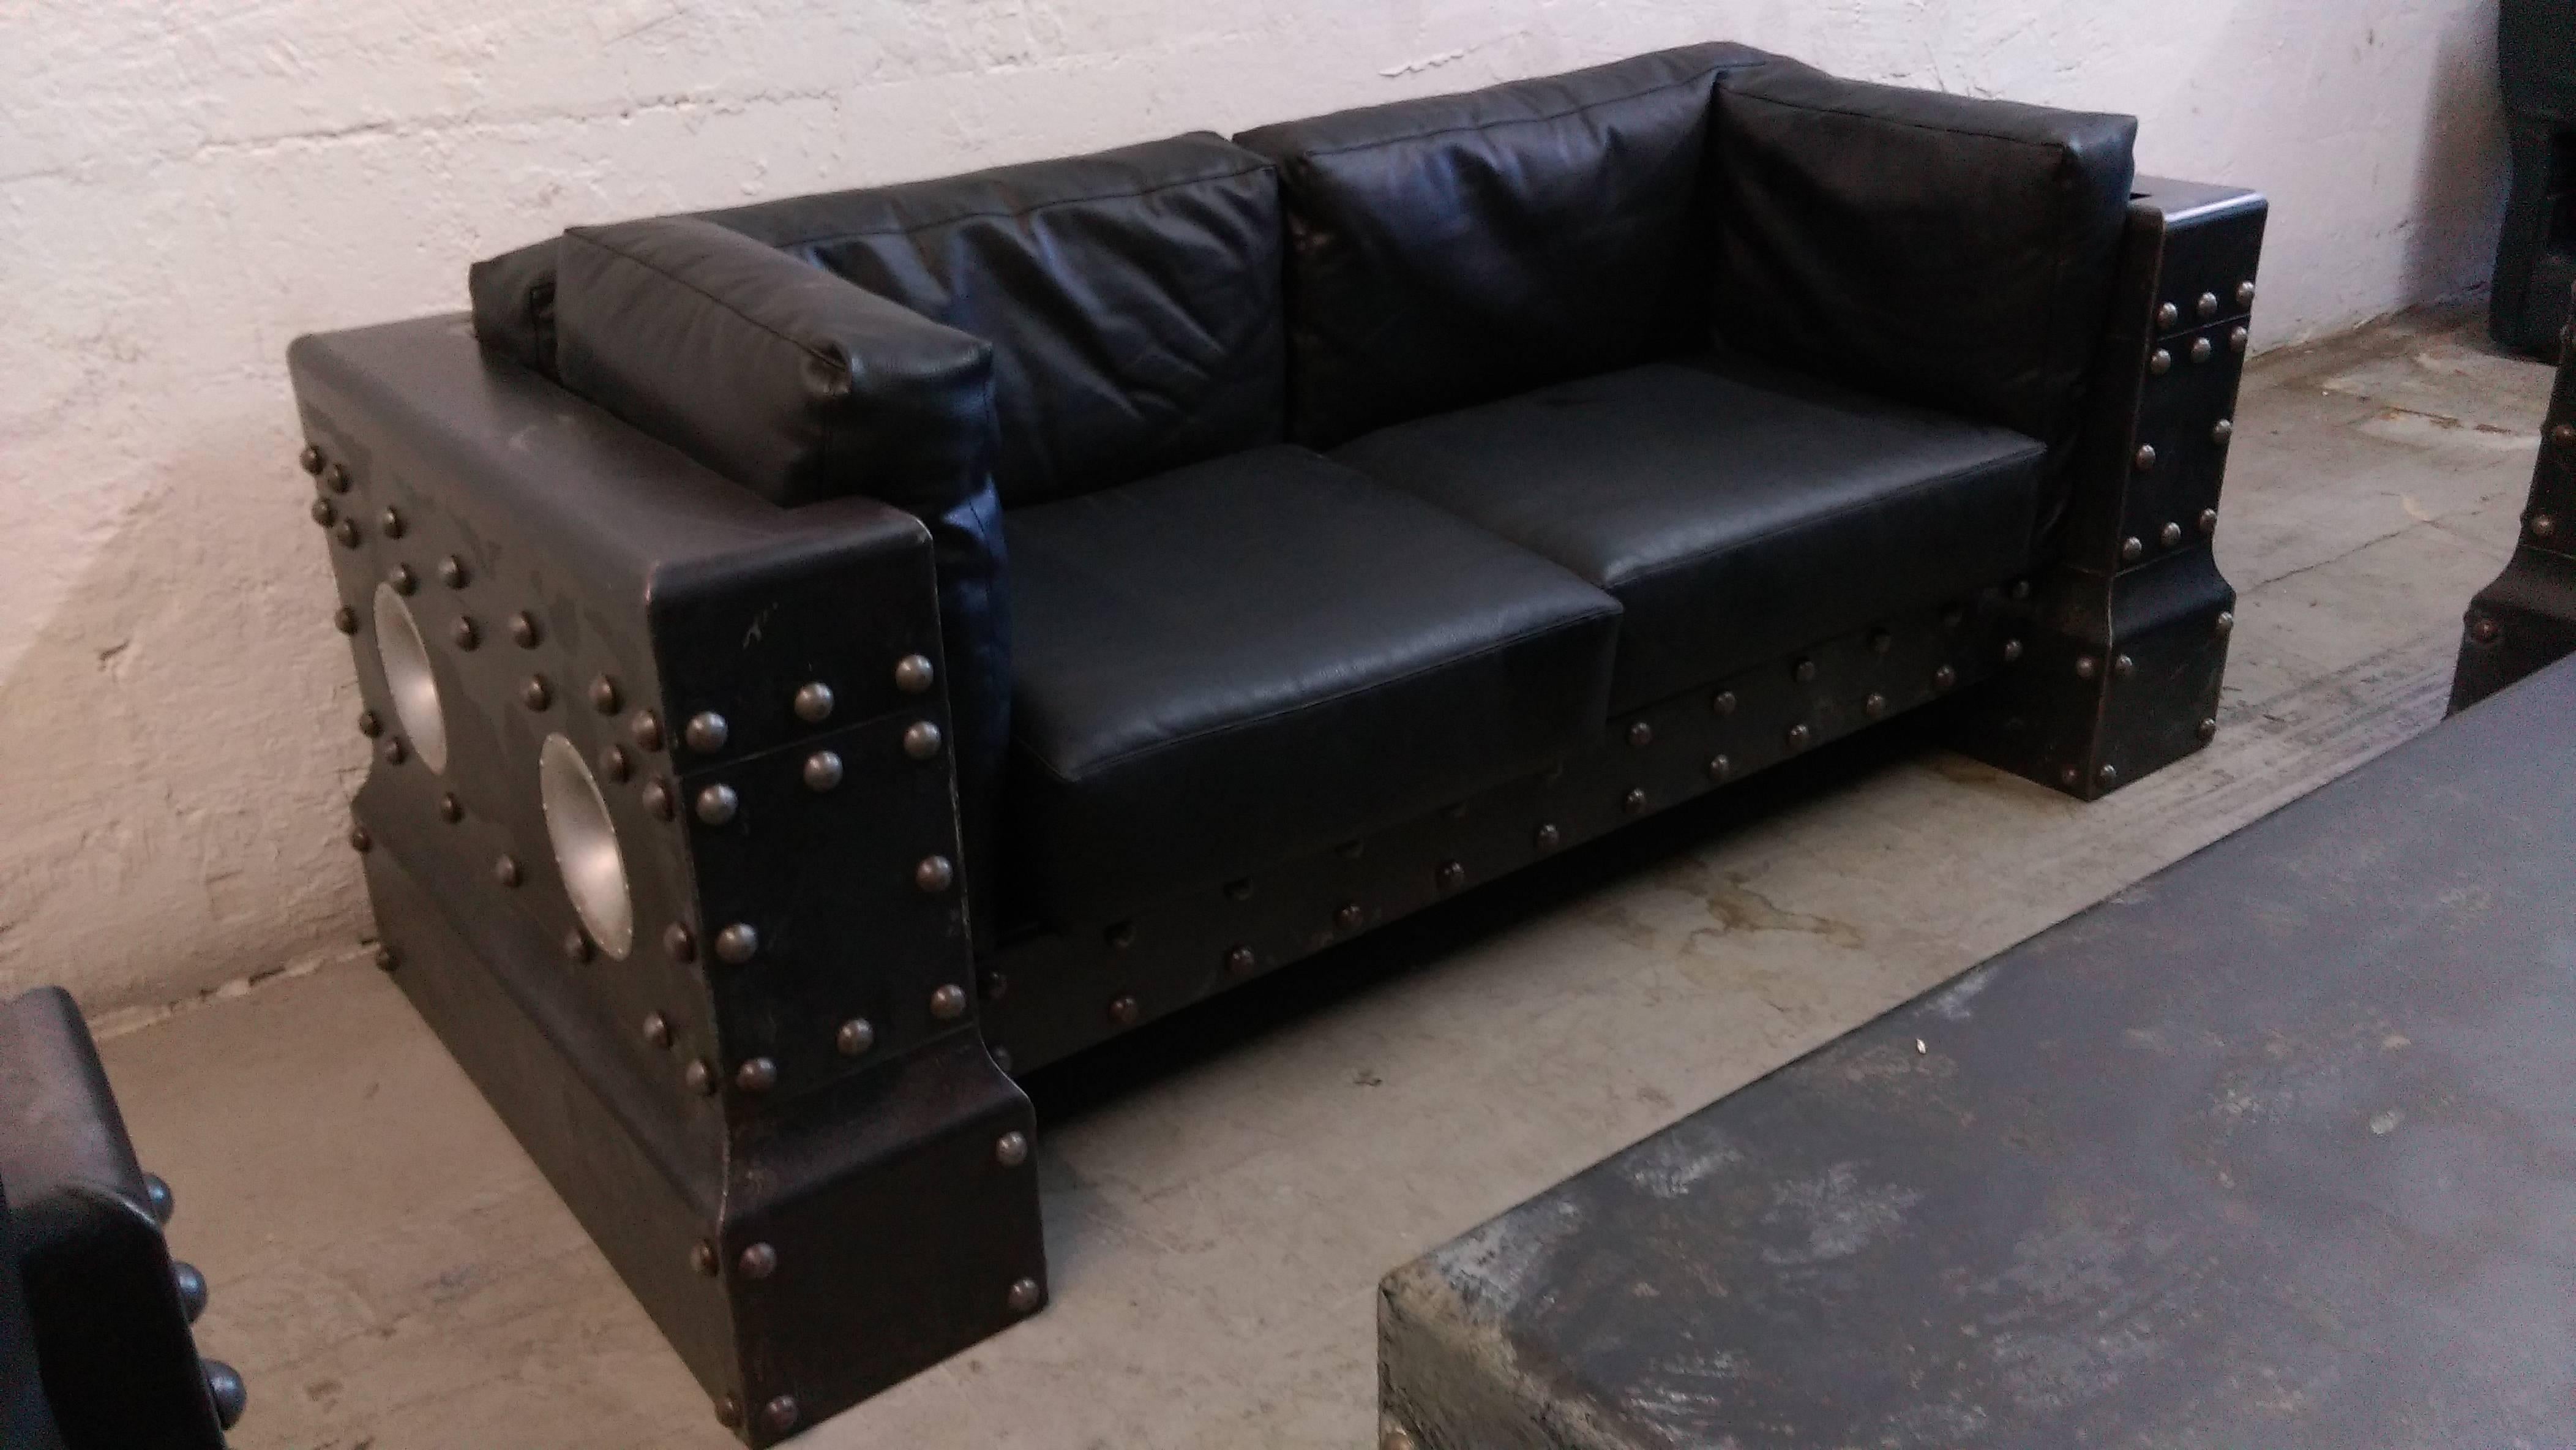 man cave couch